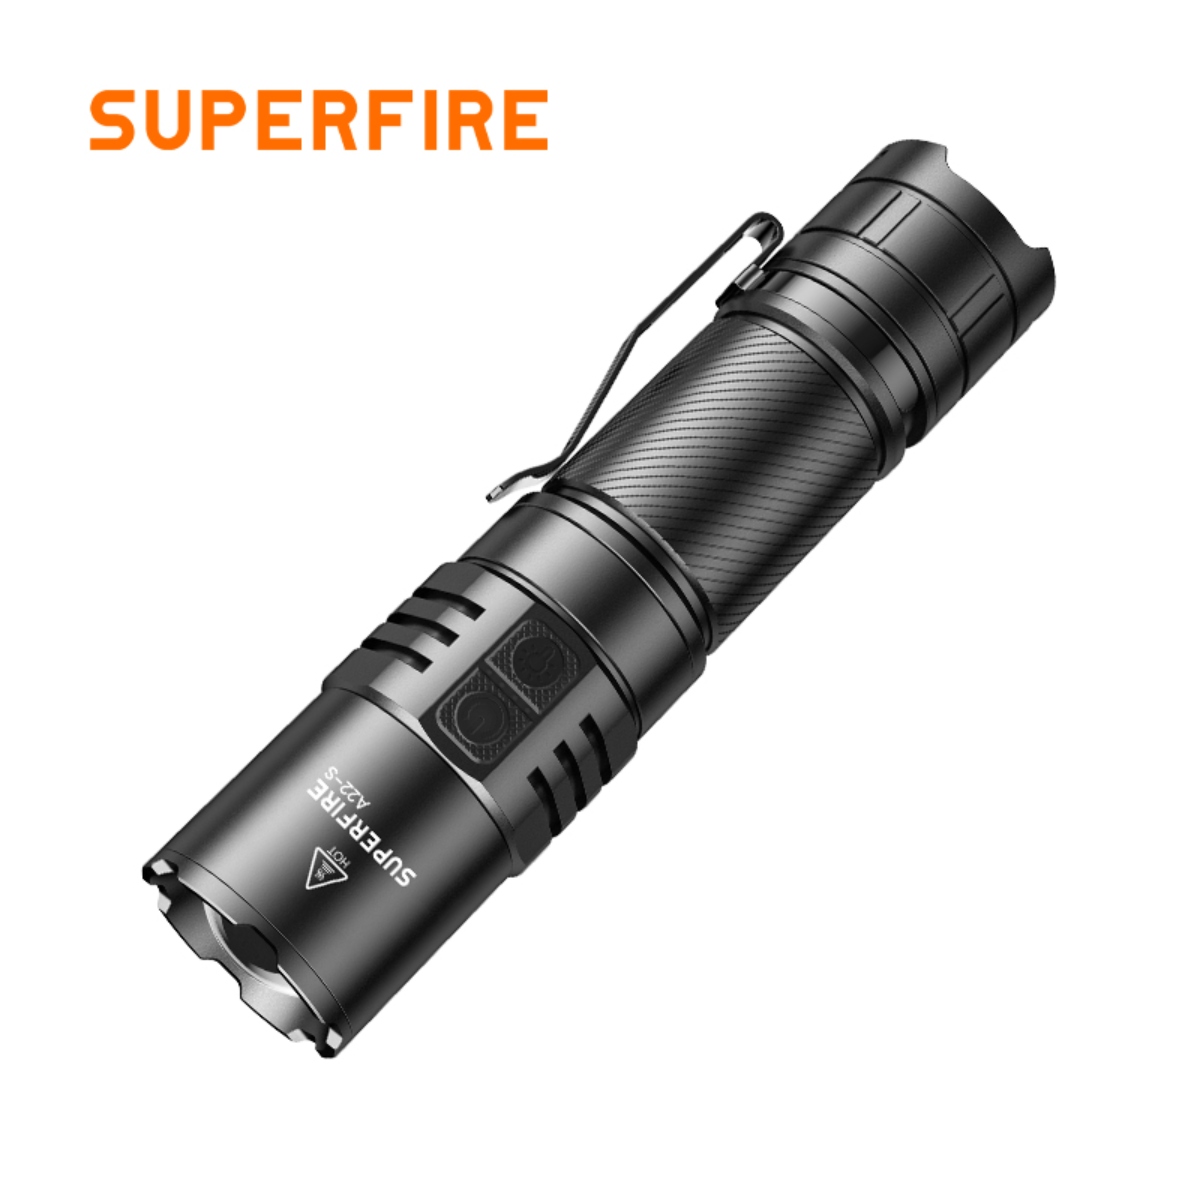 SUPERFIRE A22-S Waterproof Zoomable Flashlight